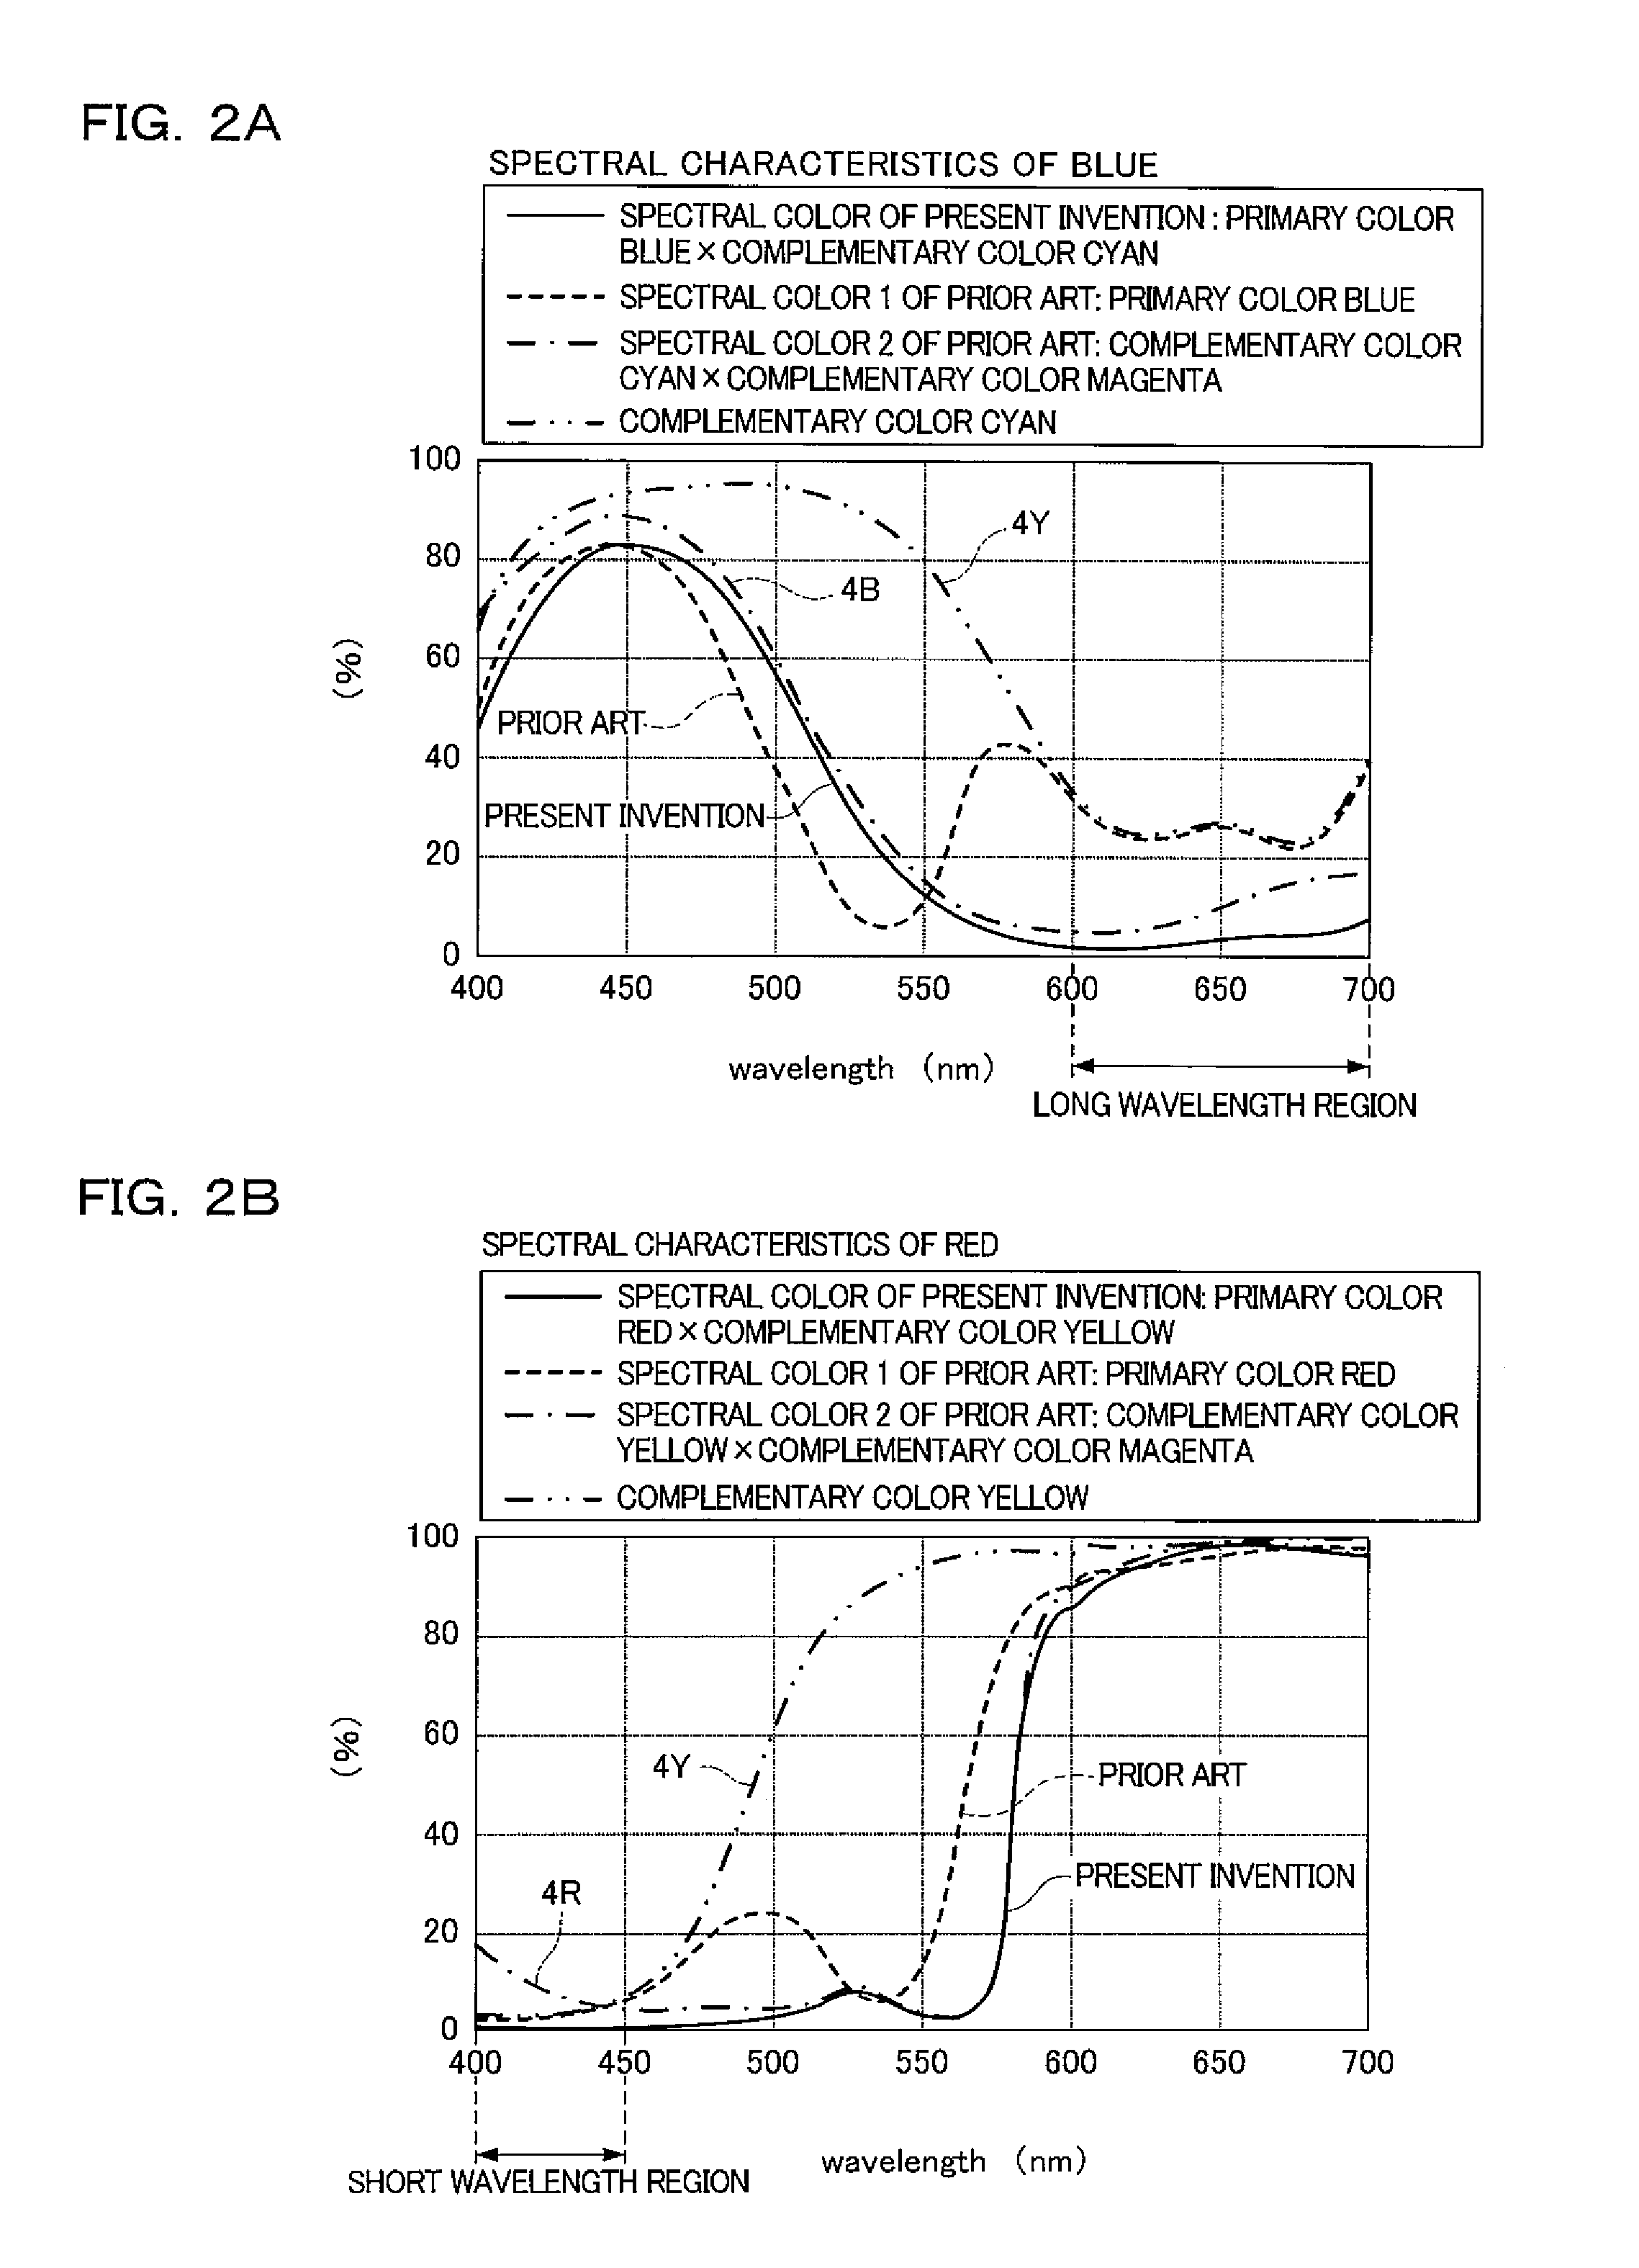 Solid-state image device